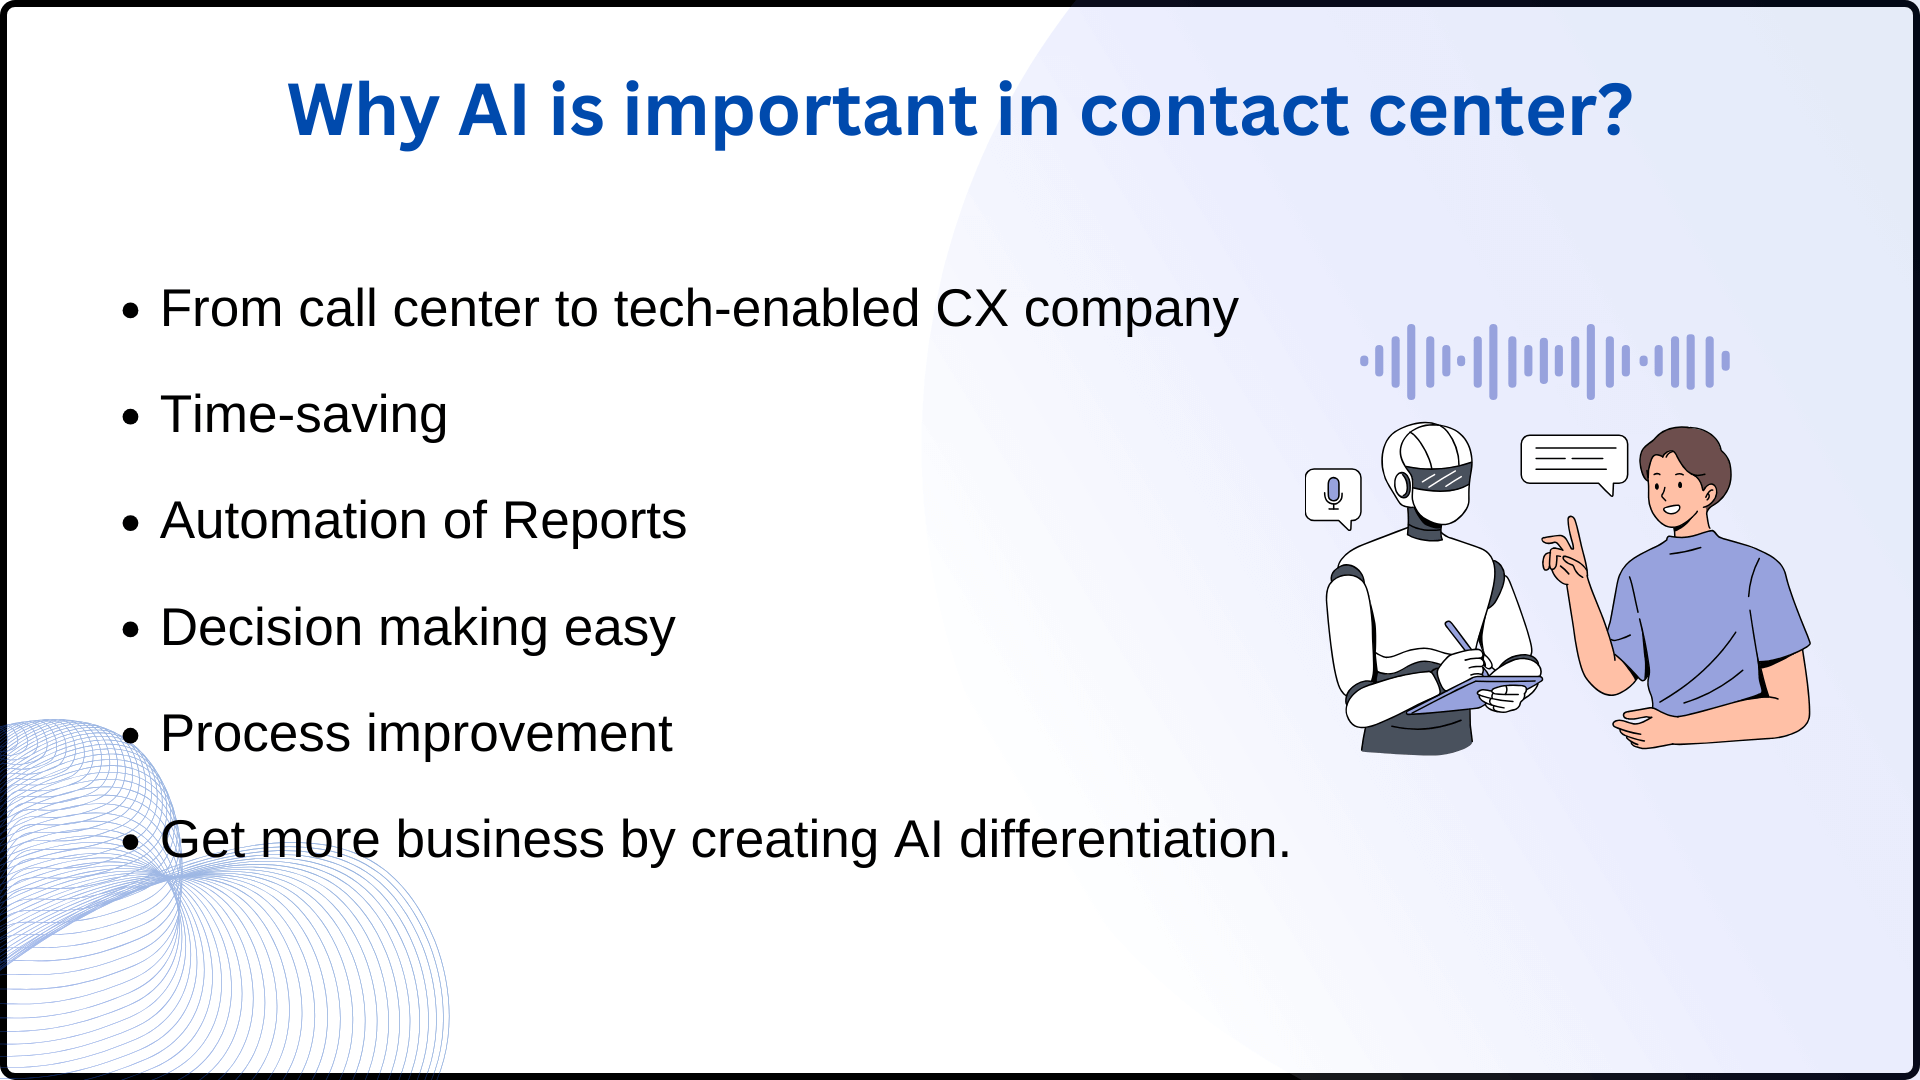 Importance of AI in contact center